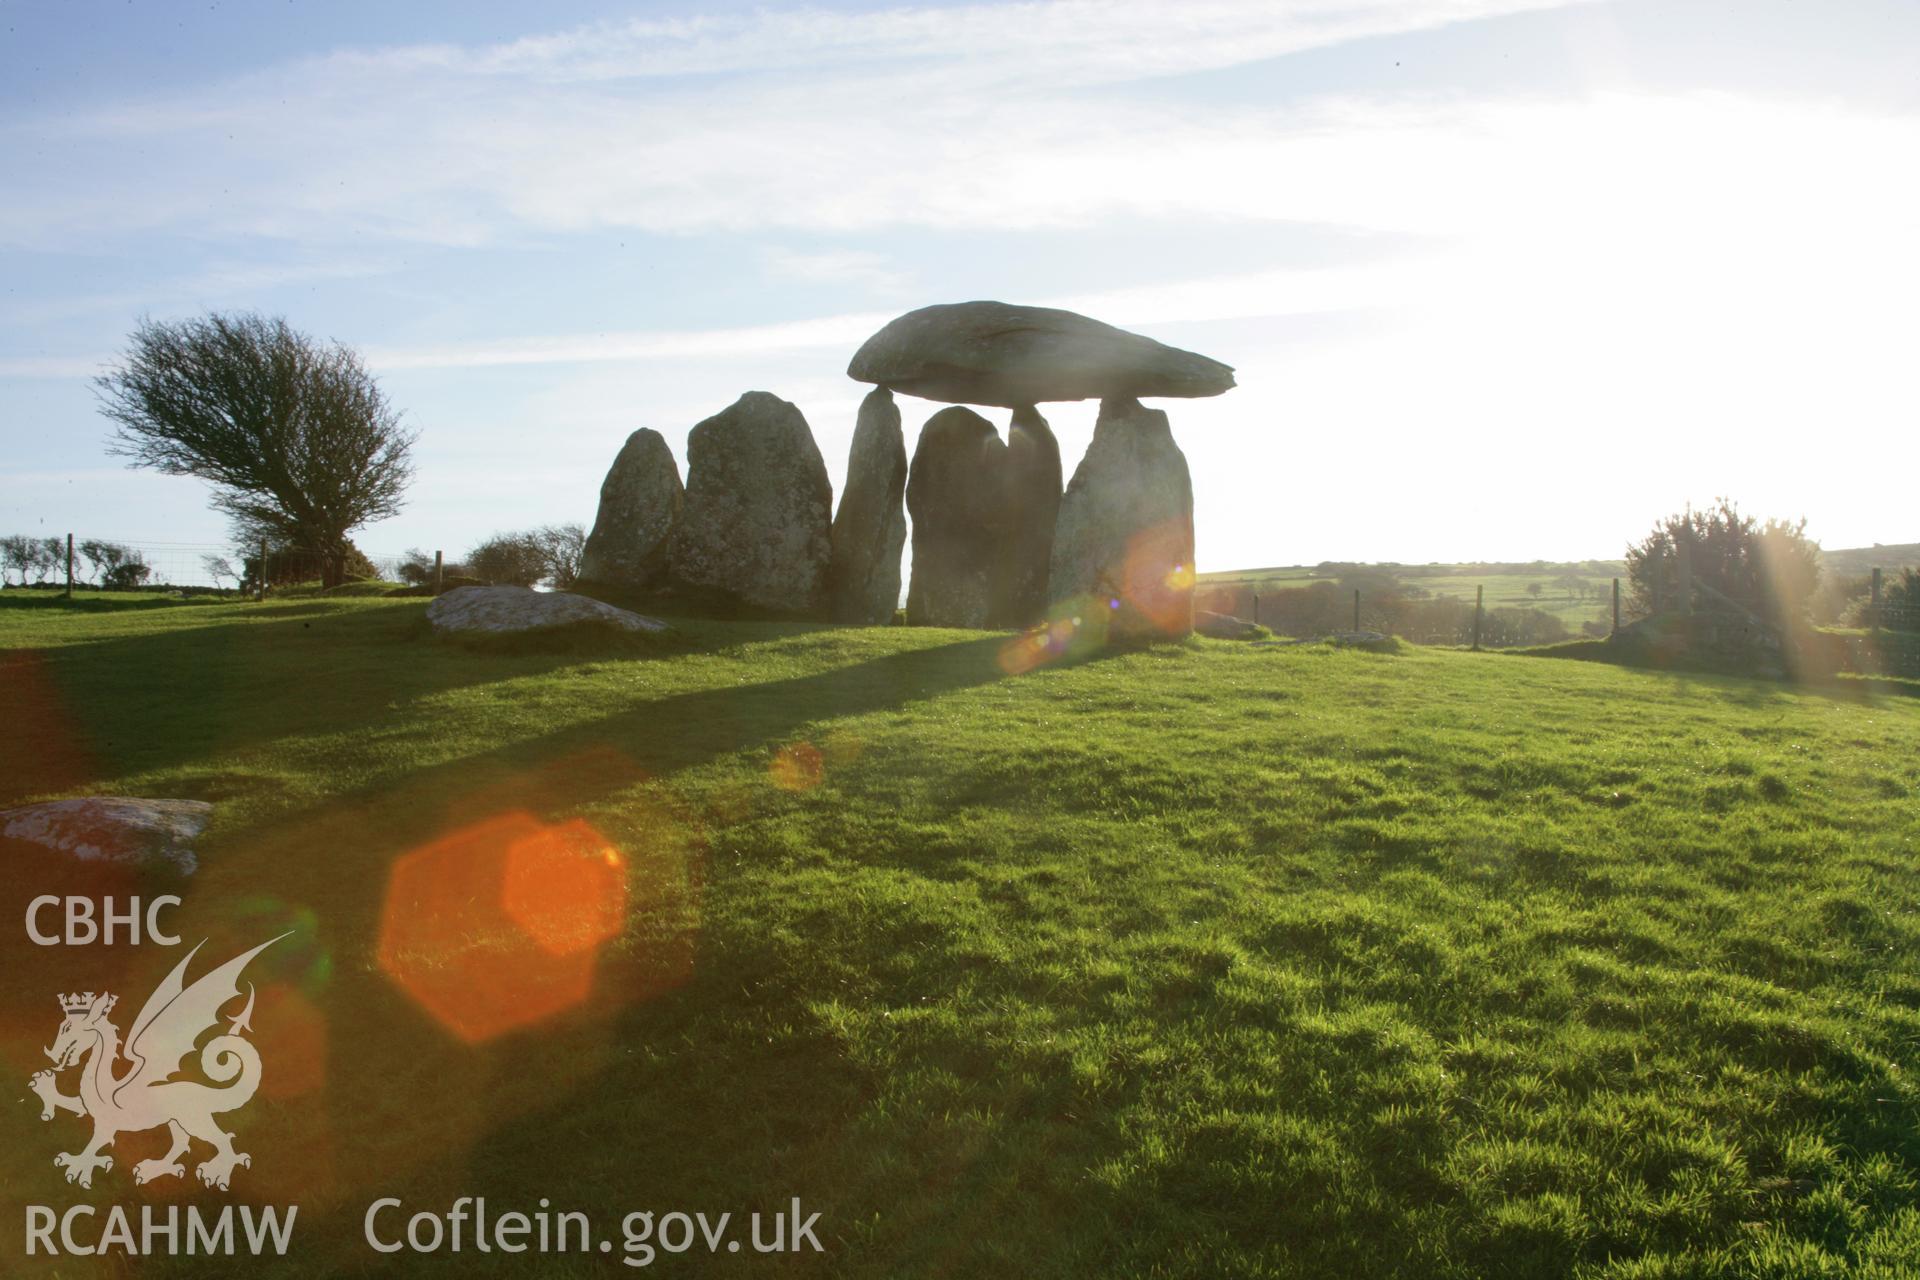 Pentre Ifan chambered tomb at sunset; general view of chamber and mound from the north.